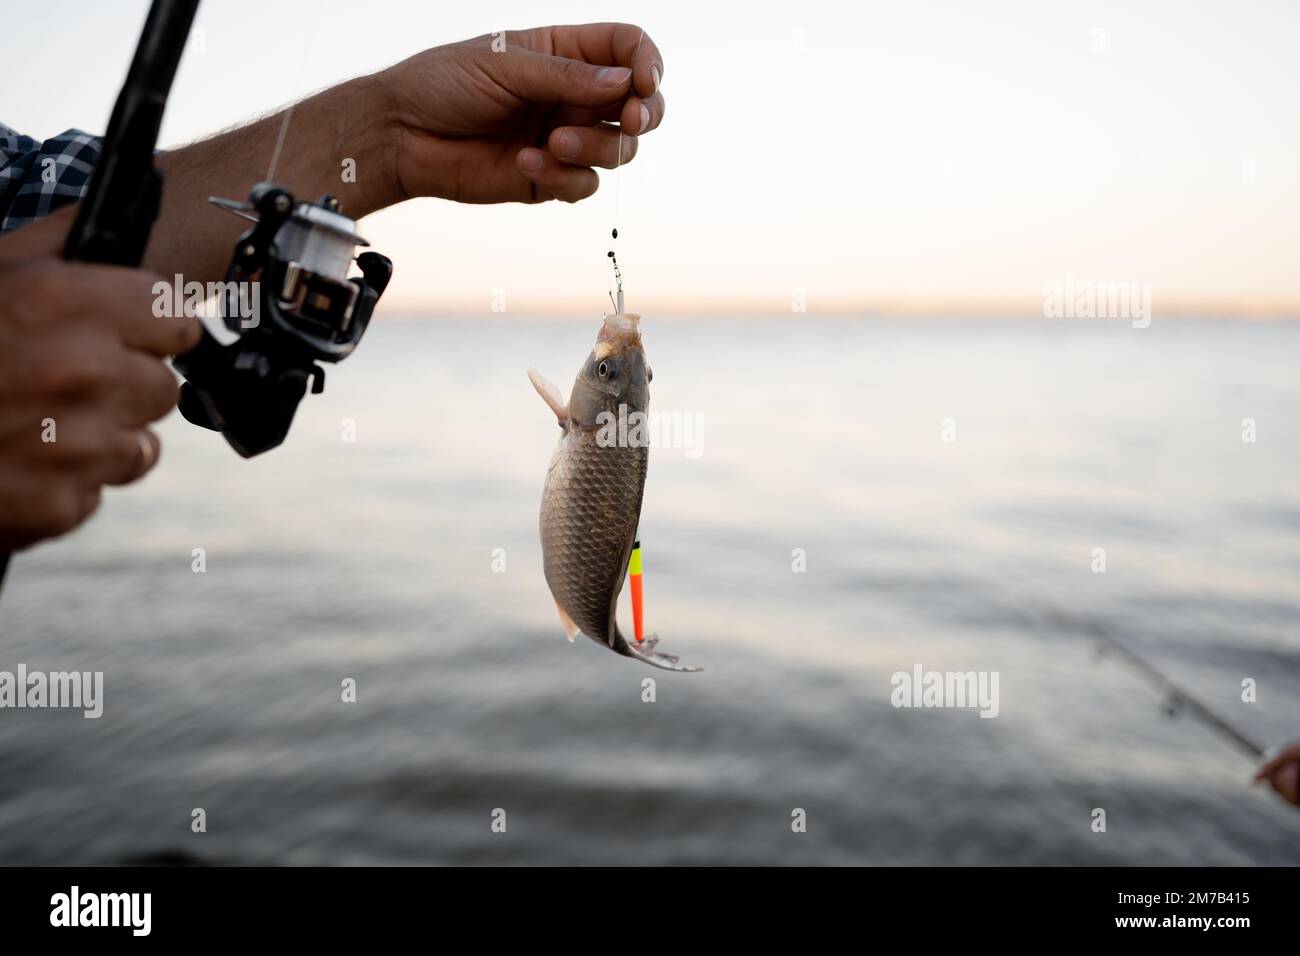 Fishing. Angler with fishing trophy. Fishing backgrounds. Man holding a small fish. Copy space Stock Photo